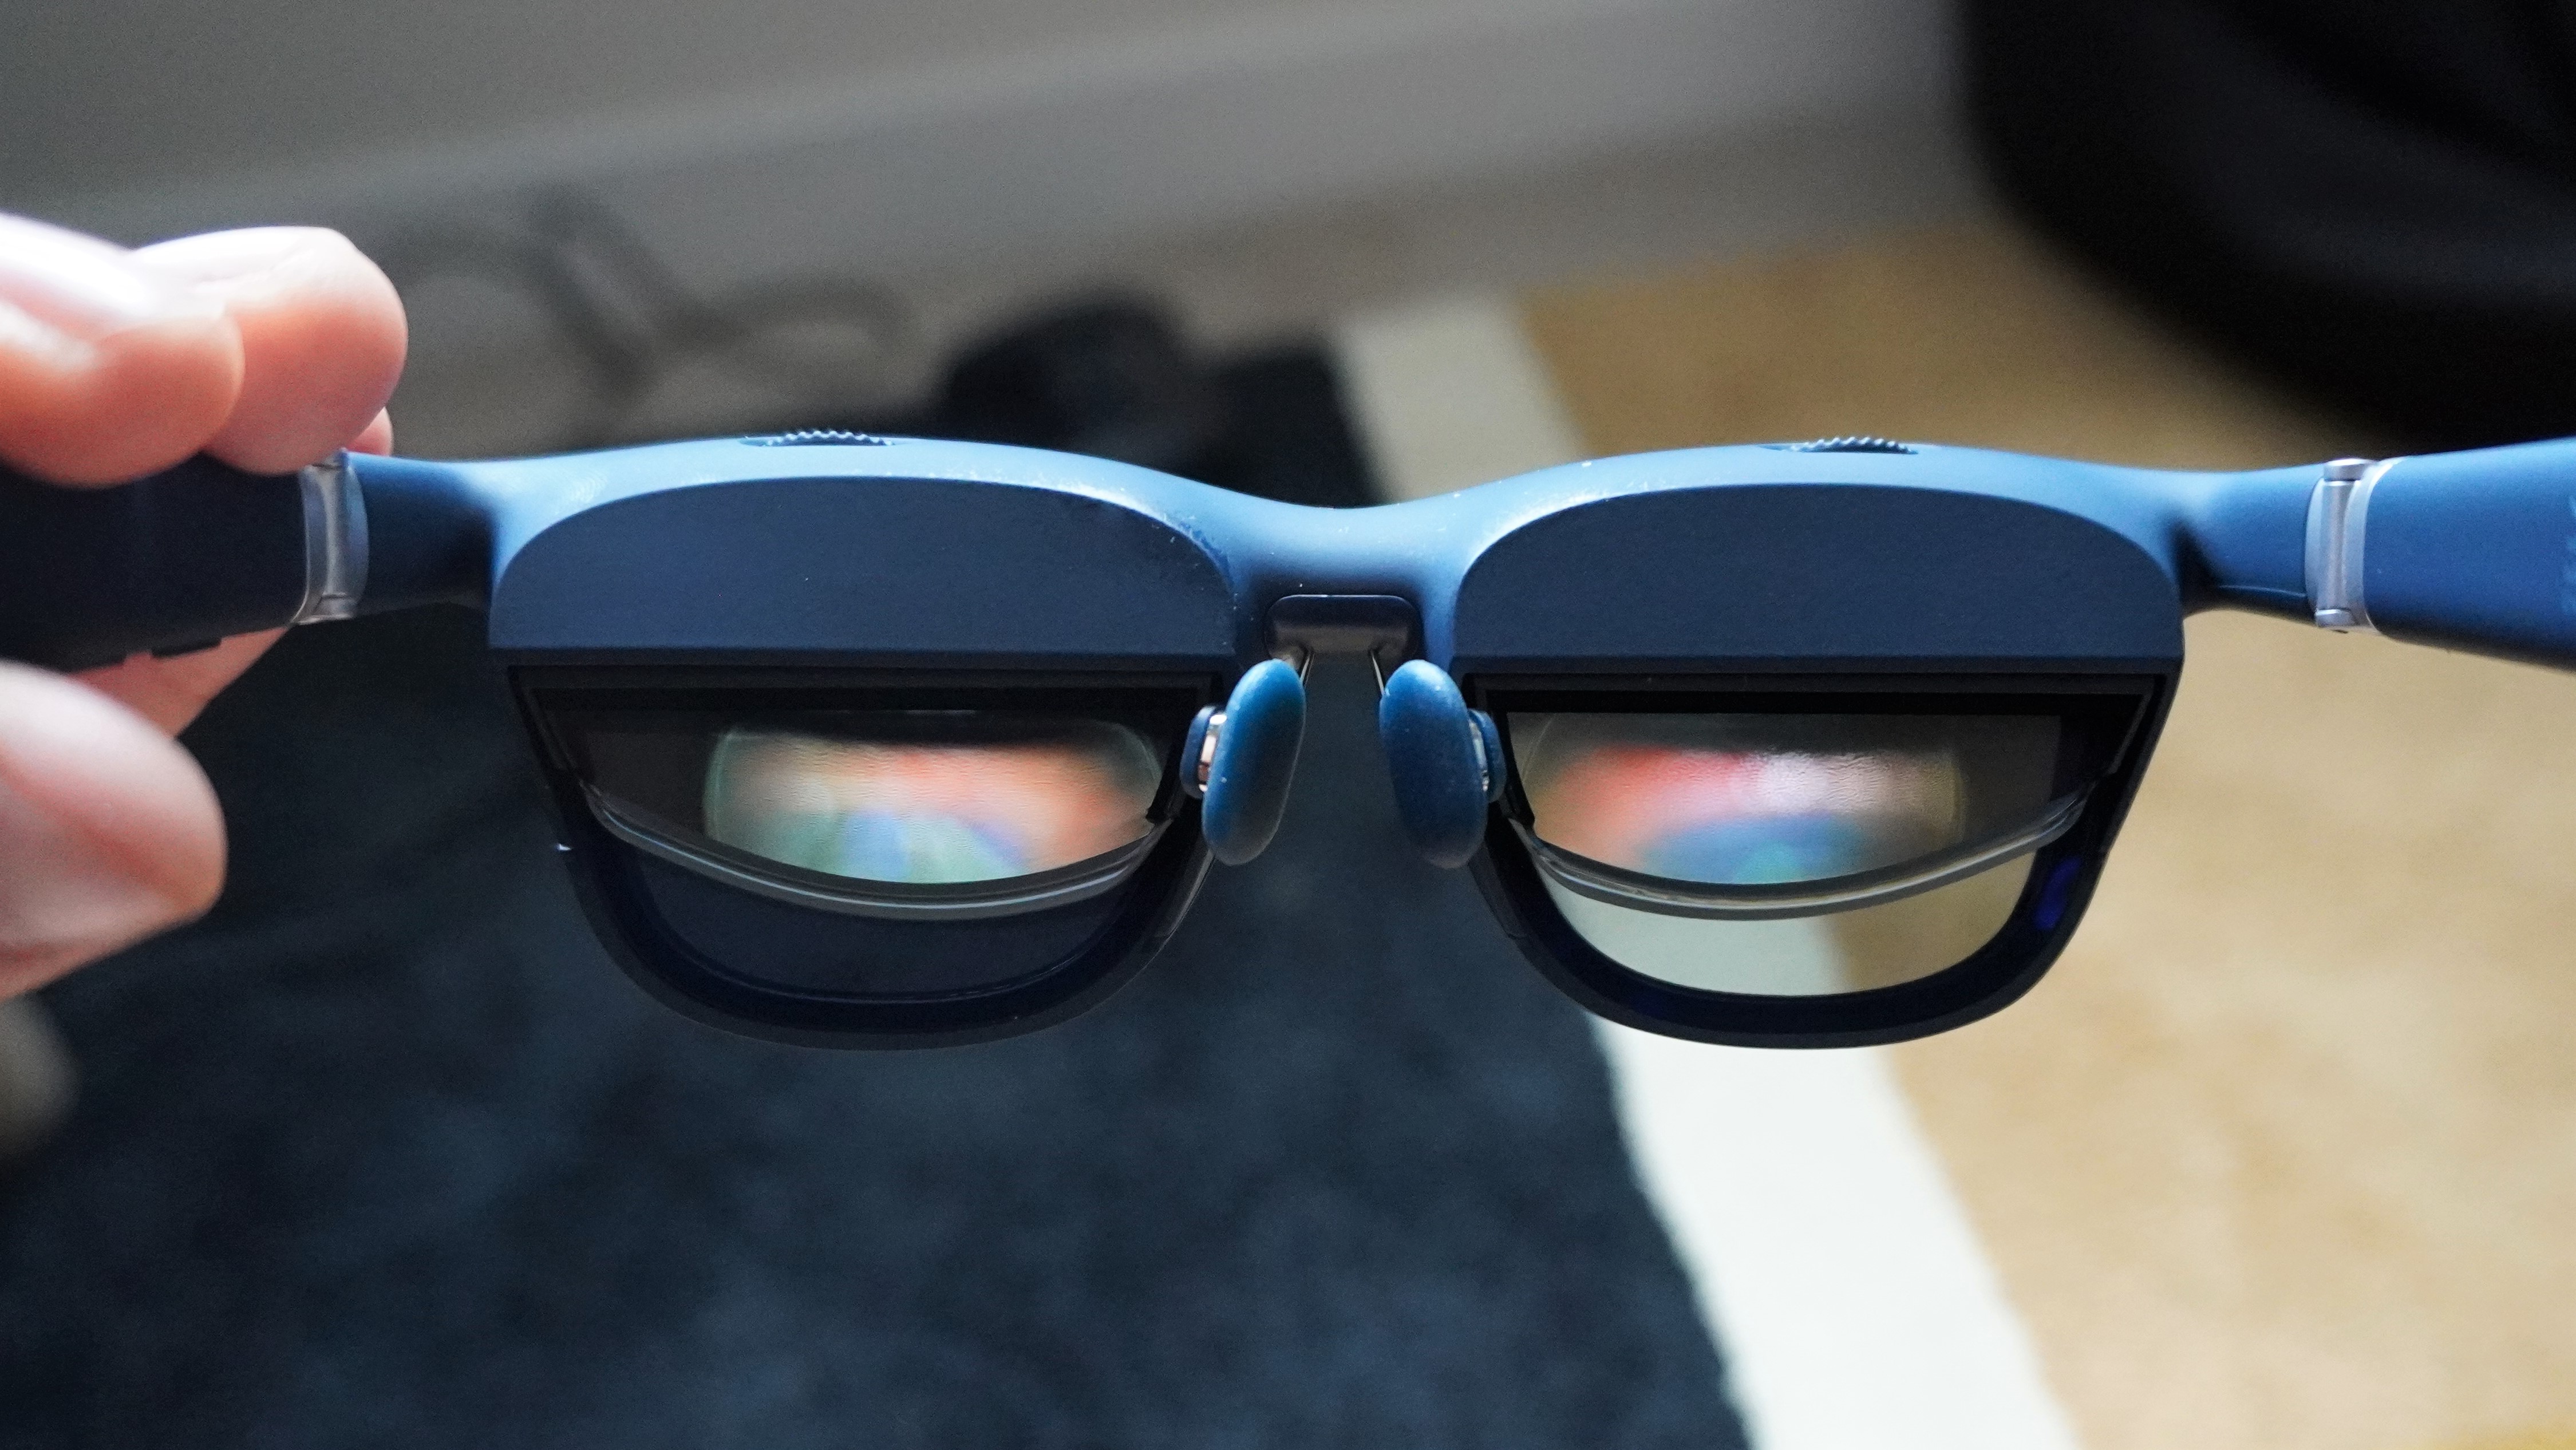 Viture ONE XR Glasses review images